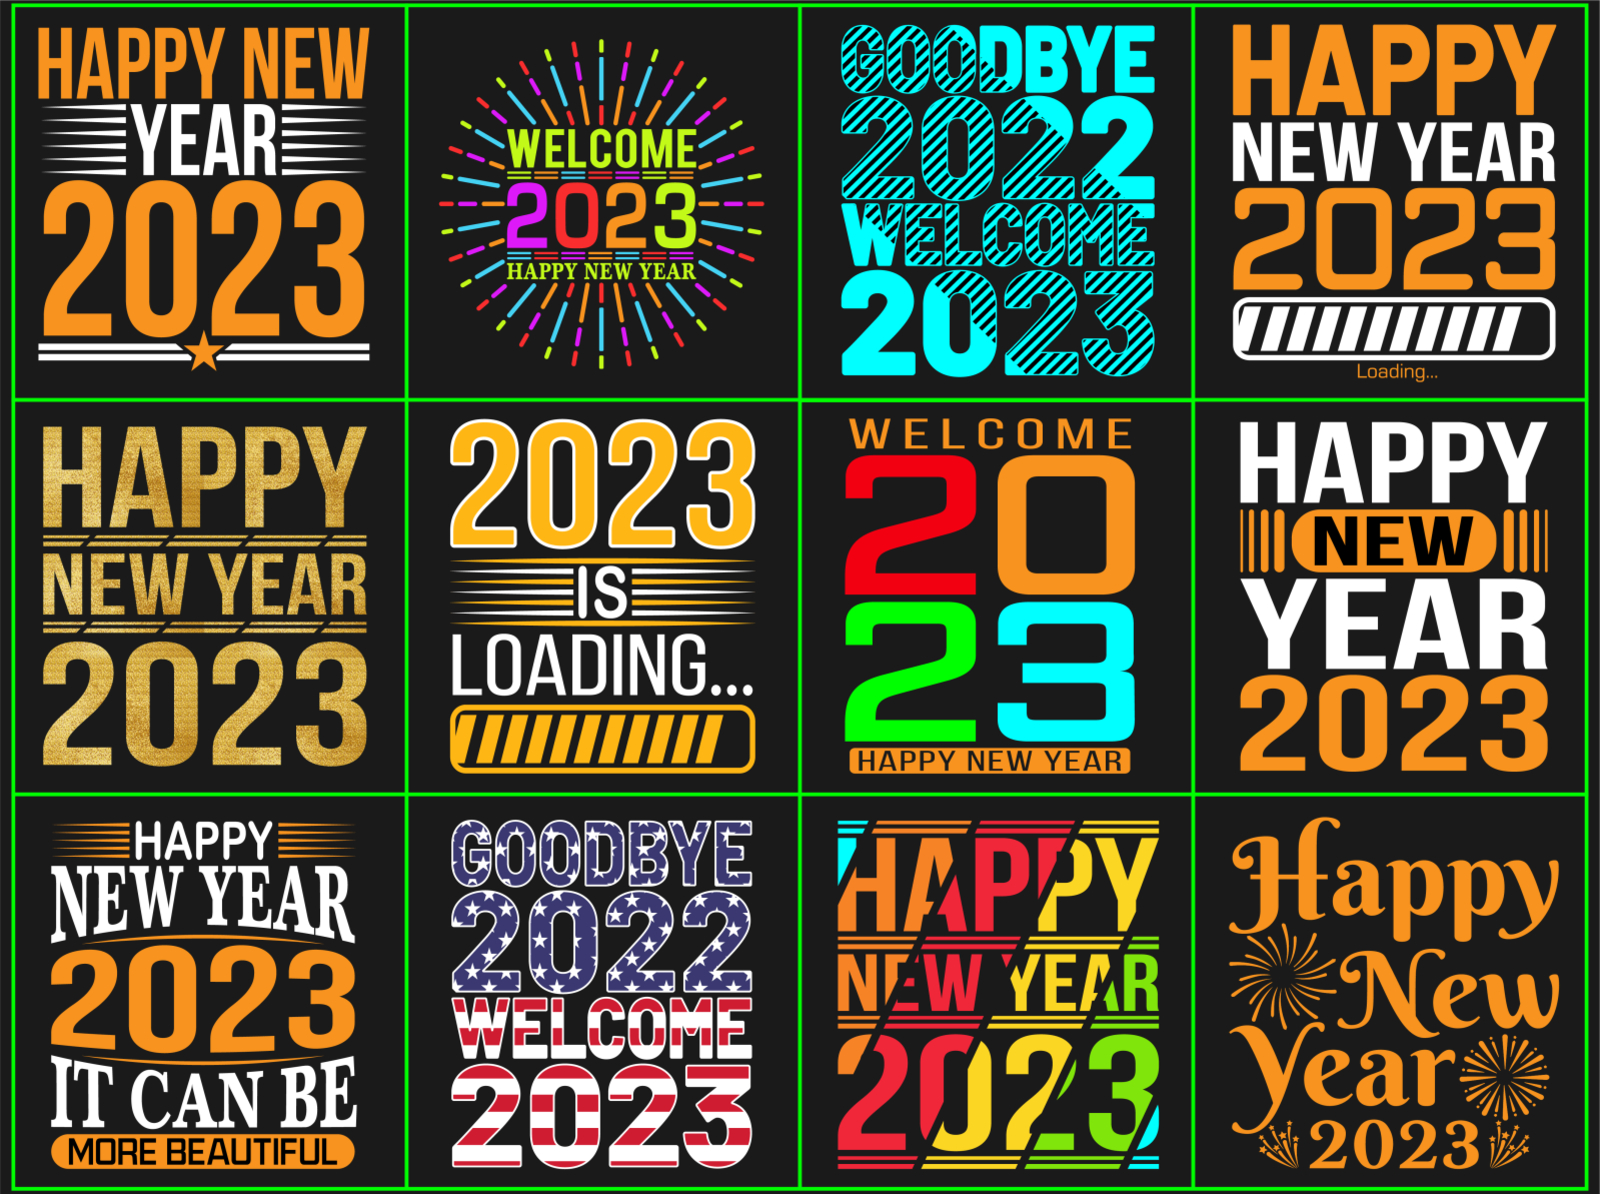 Happy New Year 2023 T-Shirt Design Bundle 2023 quotes 2023 t shirt design 2023 t-shirt design 2023 typography t-shirt graphic design happy new happy new year happy new year 2023 happy new year t shirt new year 2023 new year 2023 typography new year quotes new year t-shirt design t-shirt t-shirt design t-shirt design bundle trendy design 2023 trendy t-shirt 2023 trendy t-shirt design typography t-shirt design